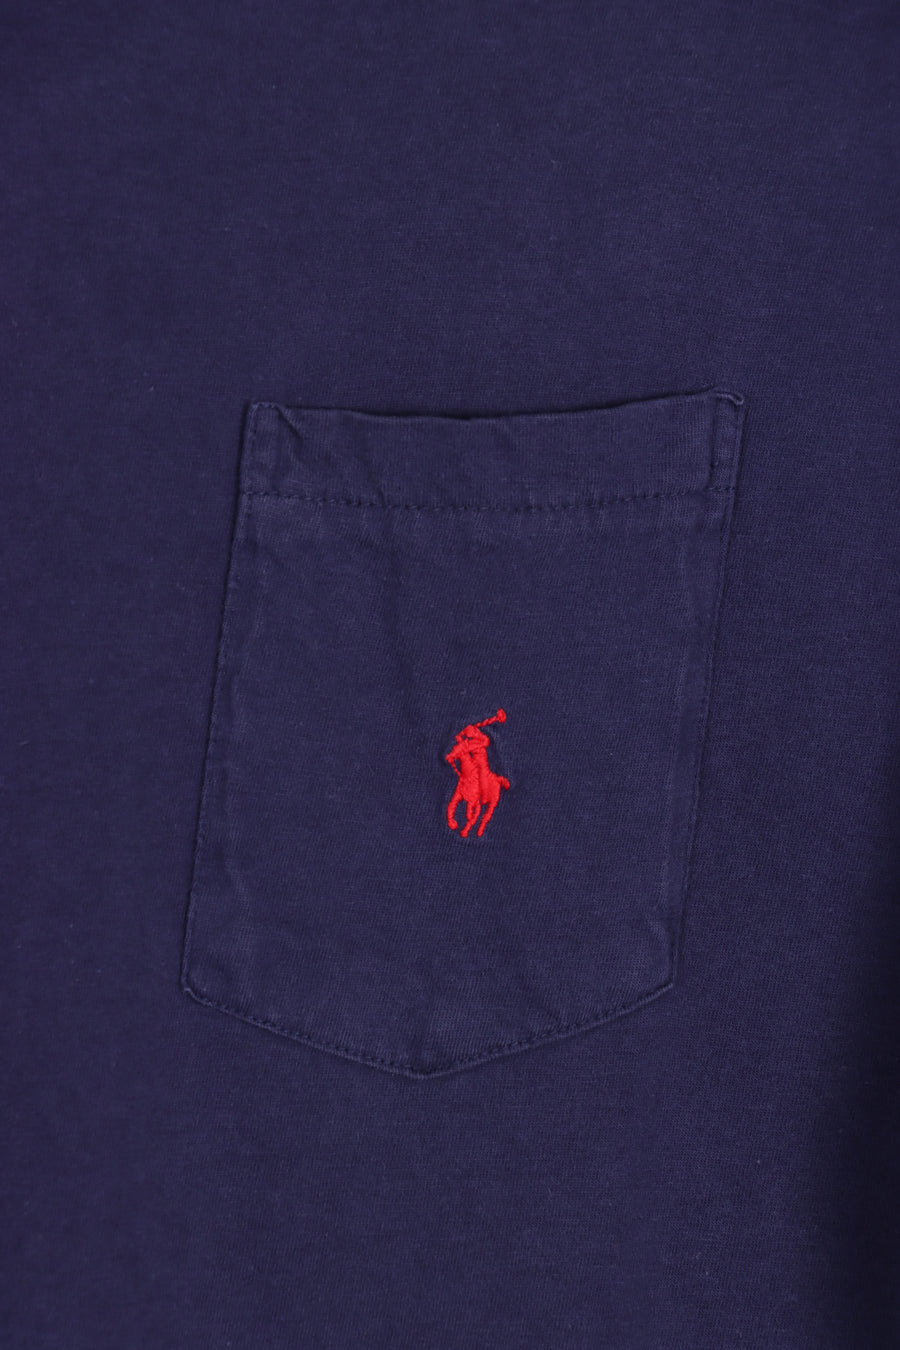 POLO RALPH LAUREN Navy & Red Embroidered Single Stitch Tee (XL)